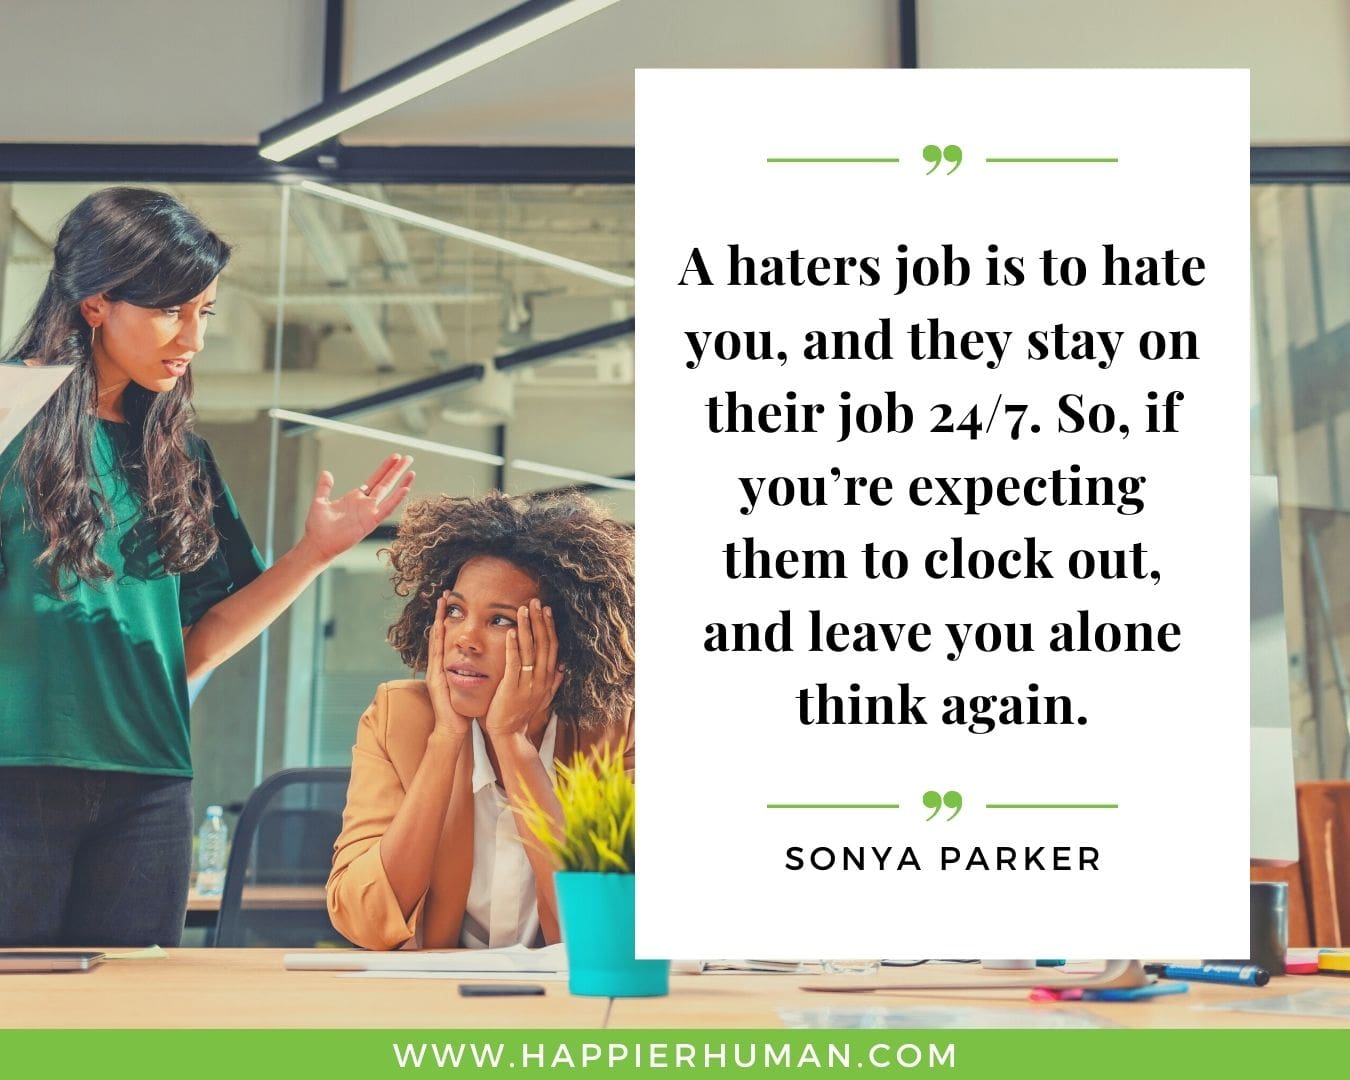 Haters Quotes - “A haters job is to hate you, and they stay on their job 24/7. So, if you’re expecting them to clock out, and leave you alone think again.” - Sonya Parker